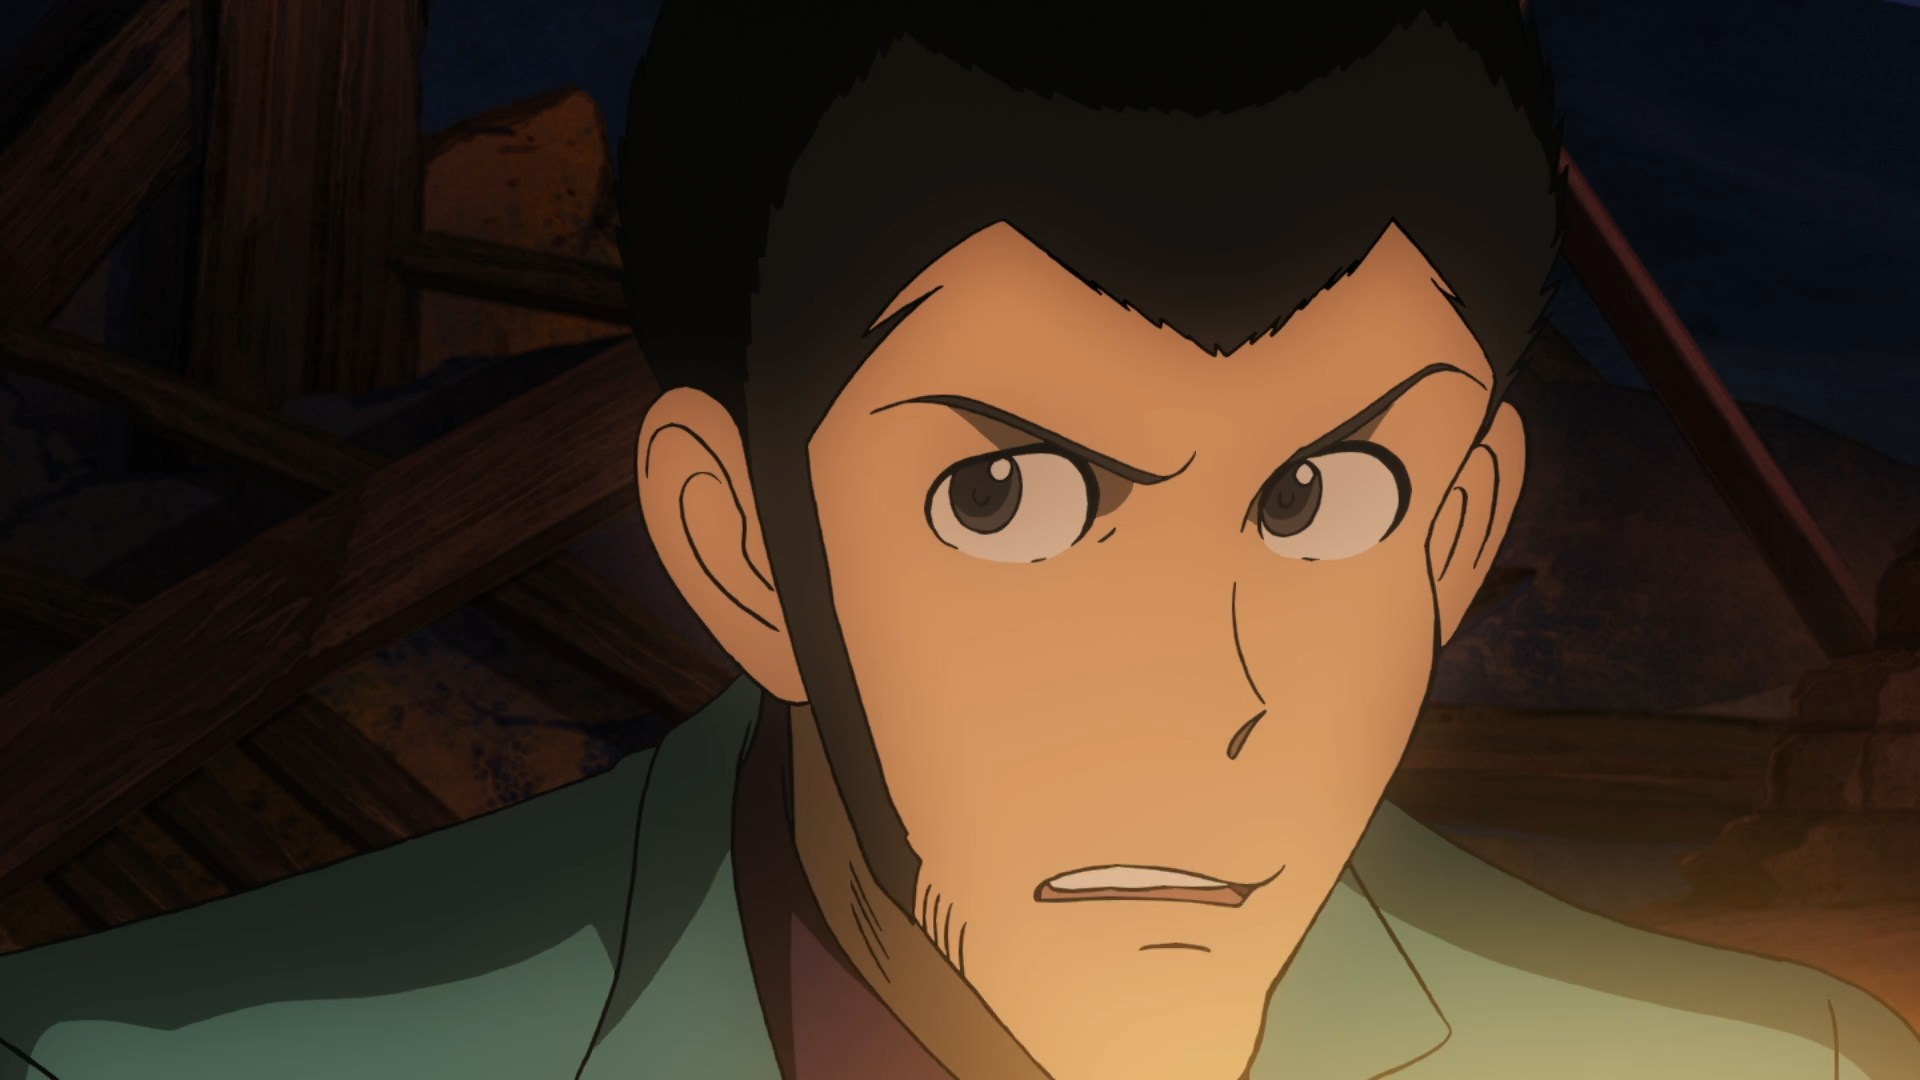 Lupin the Third Part 6 - 14